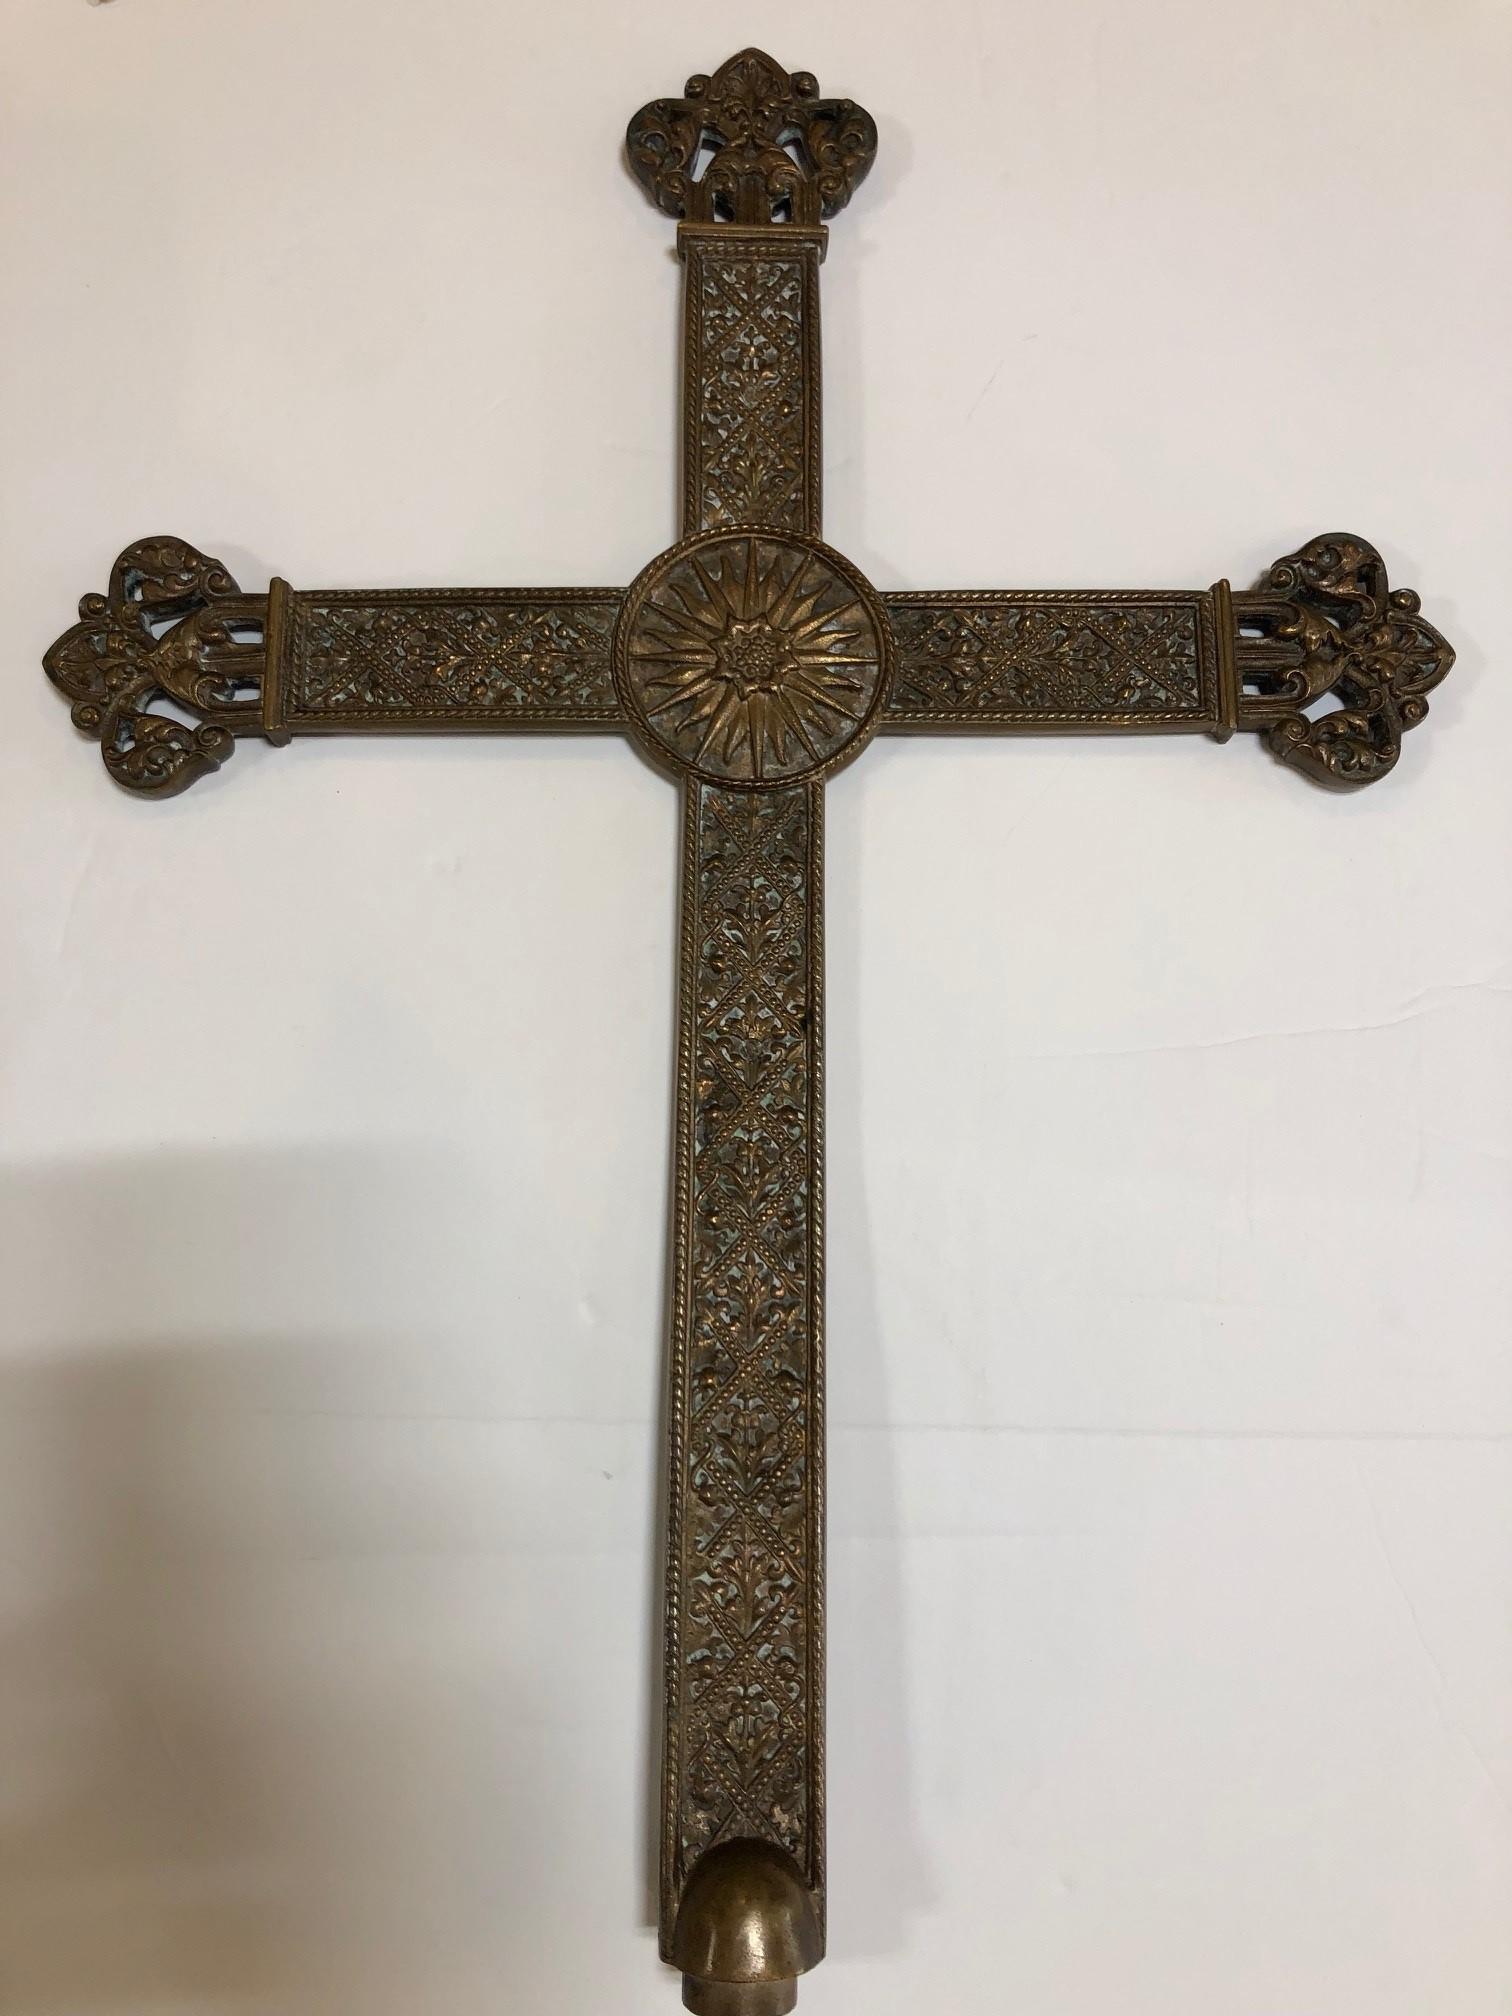 A magnificent 19th century bronze cross. This cross is amazing it's the same on both sides very ornate simply the best. The base of the cross is 1.5